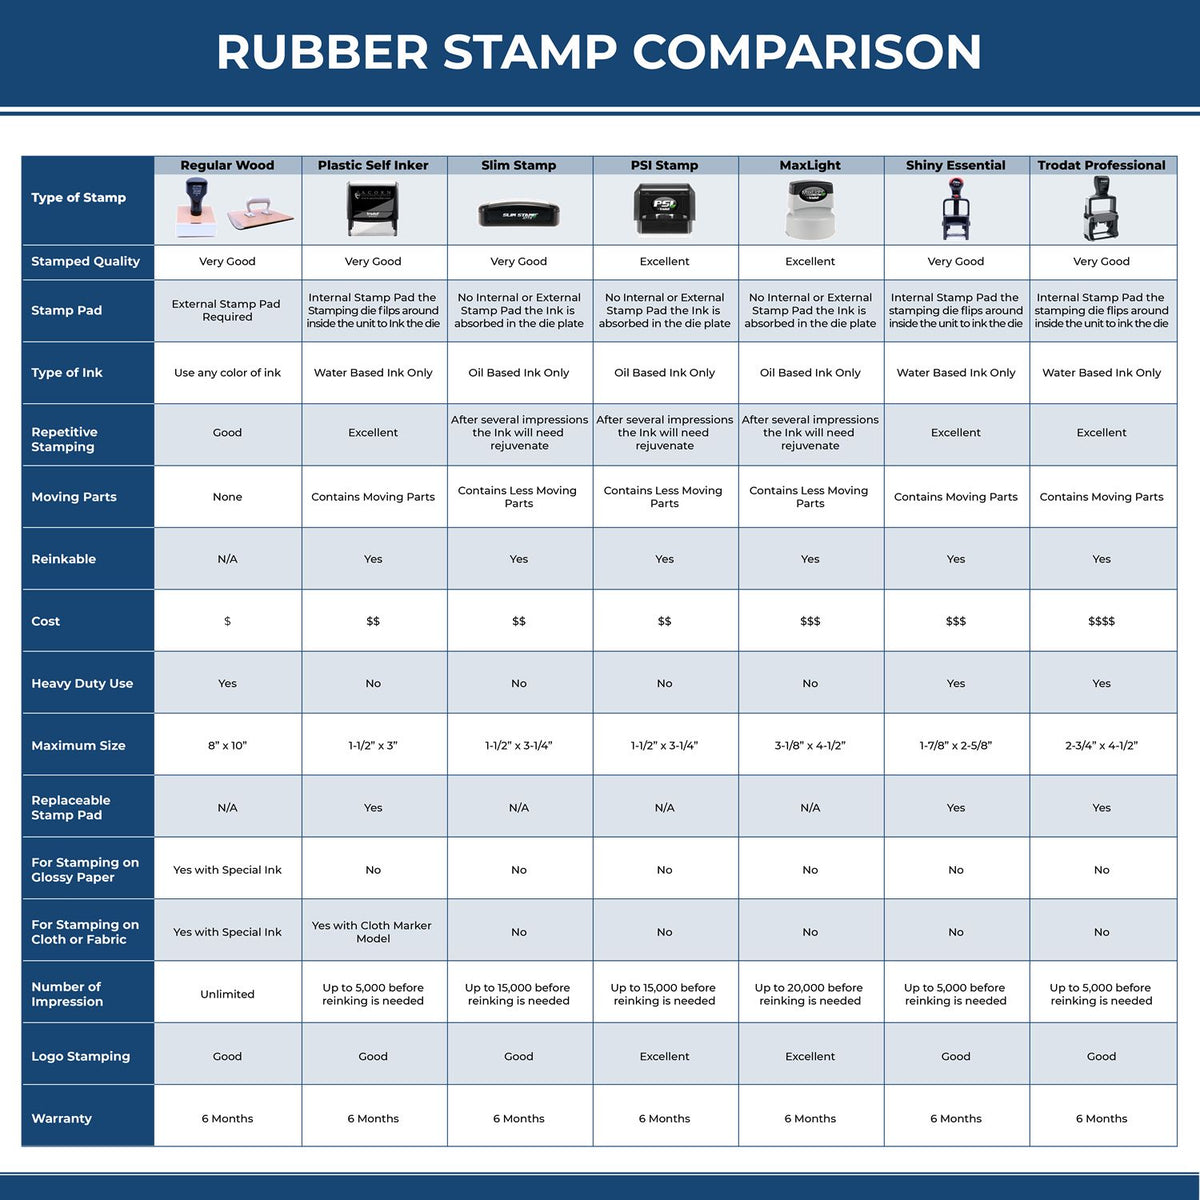 Self Inking Authorizations Revoked Stamp 4243S Rubber Stamp Comparison